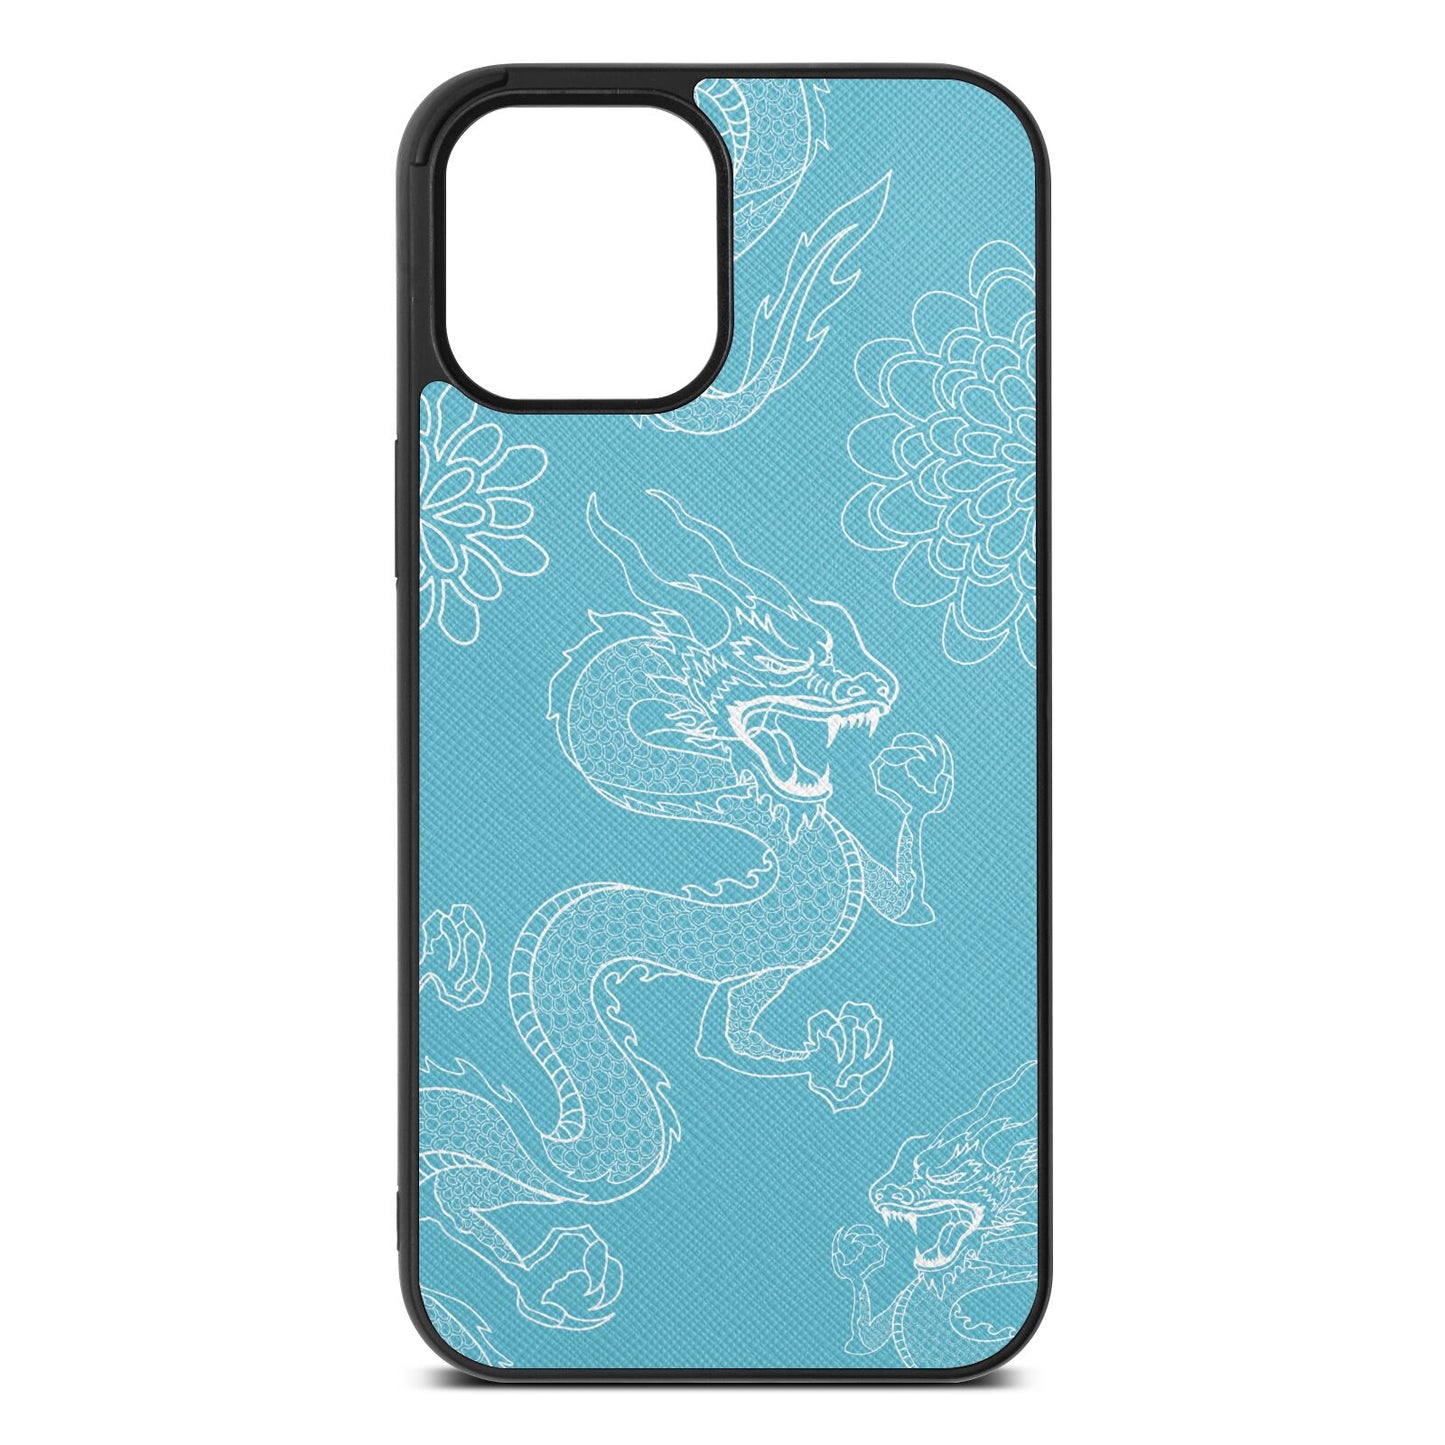 Dragons Sky Saffiano Leather iPhone 12 Pro Max Case